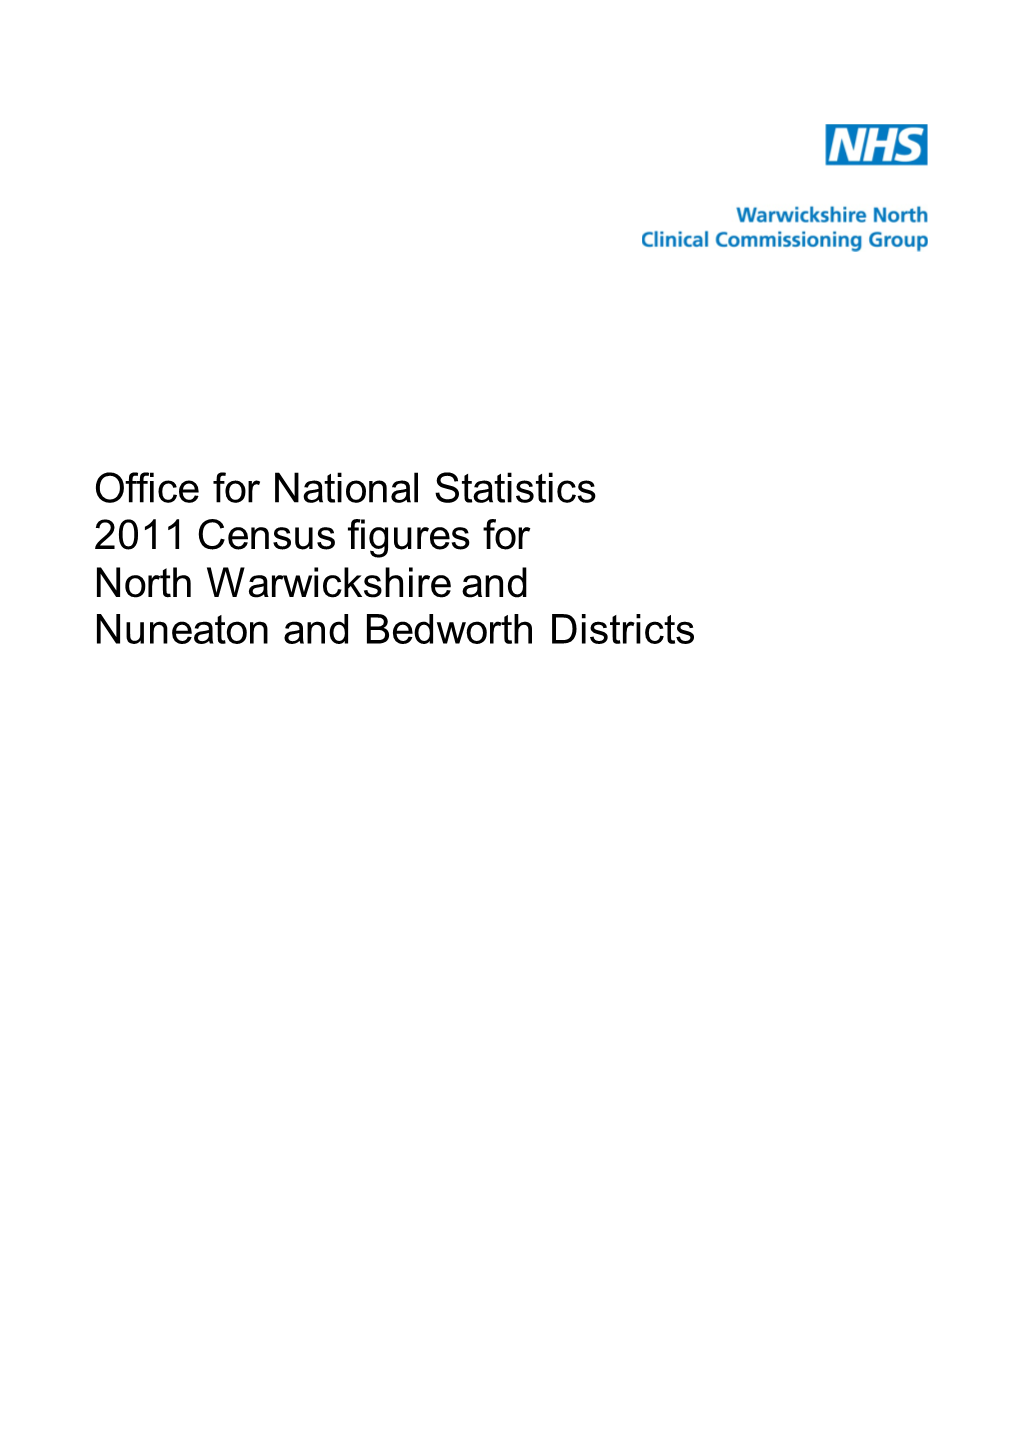 Office for National Statistics for WNCCG.Pdf